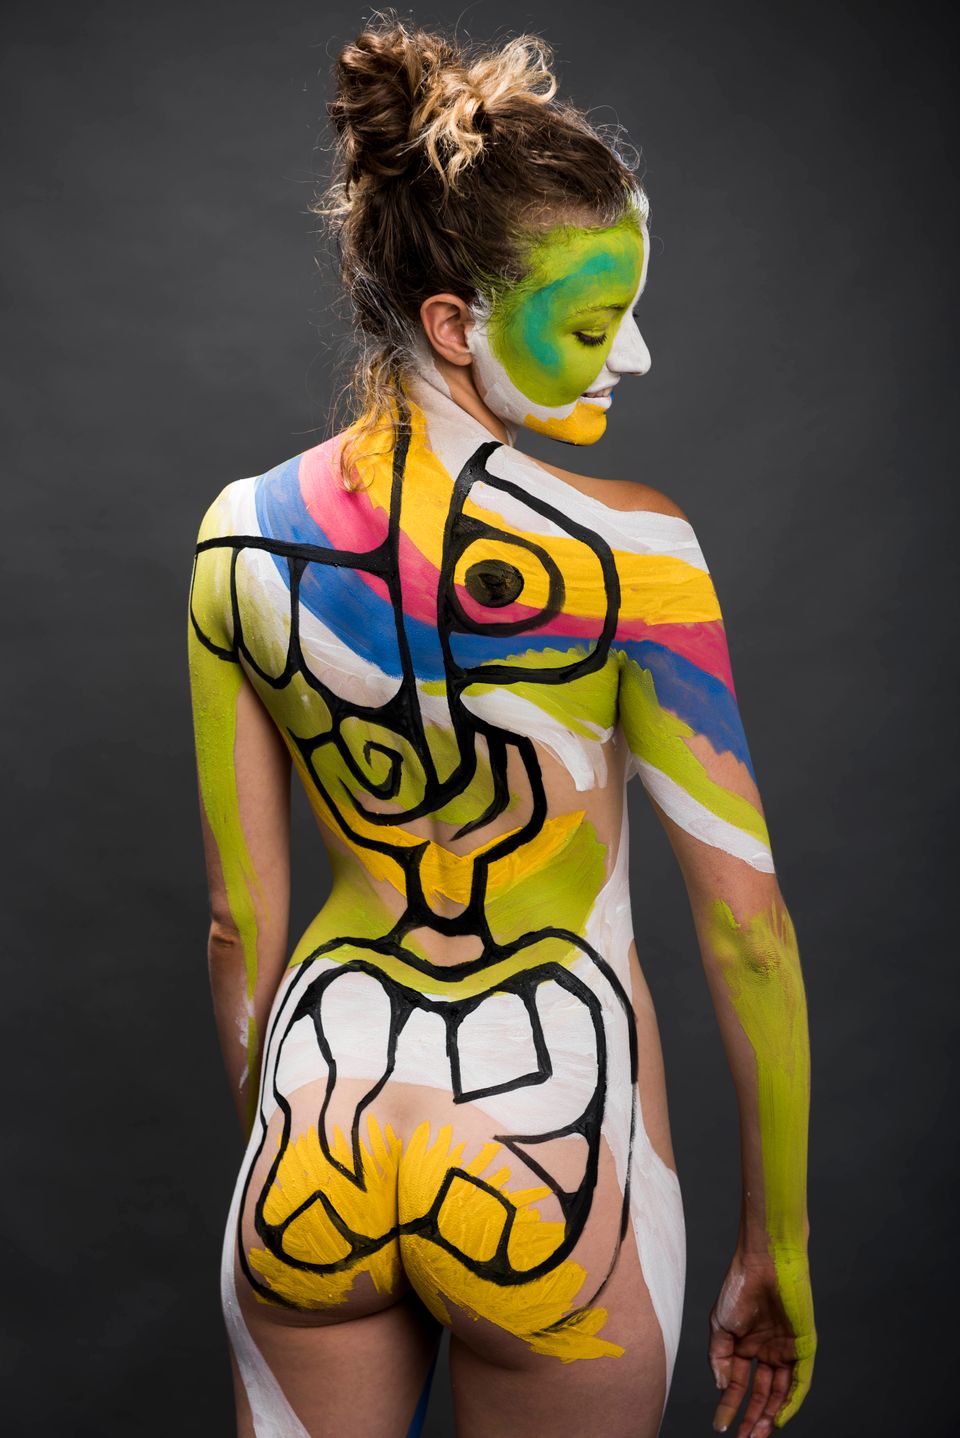 This Is What It's Like To Strip And Get Body Painted For The First Time ( NSFW) | HuffPost Weird News